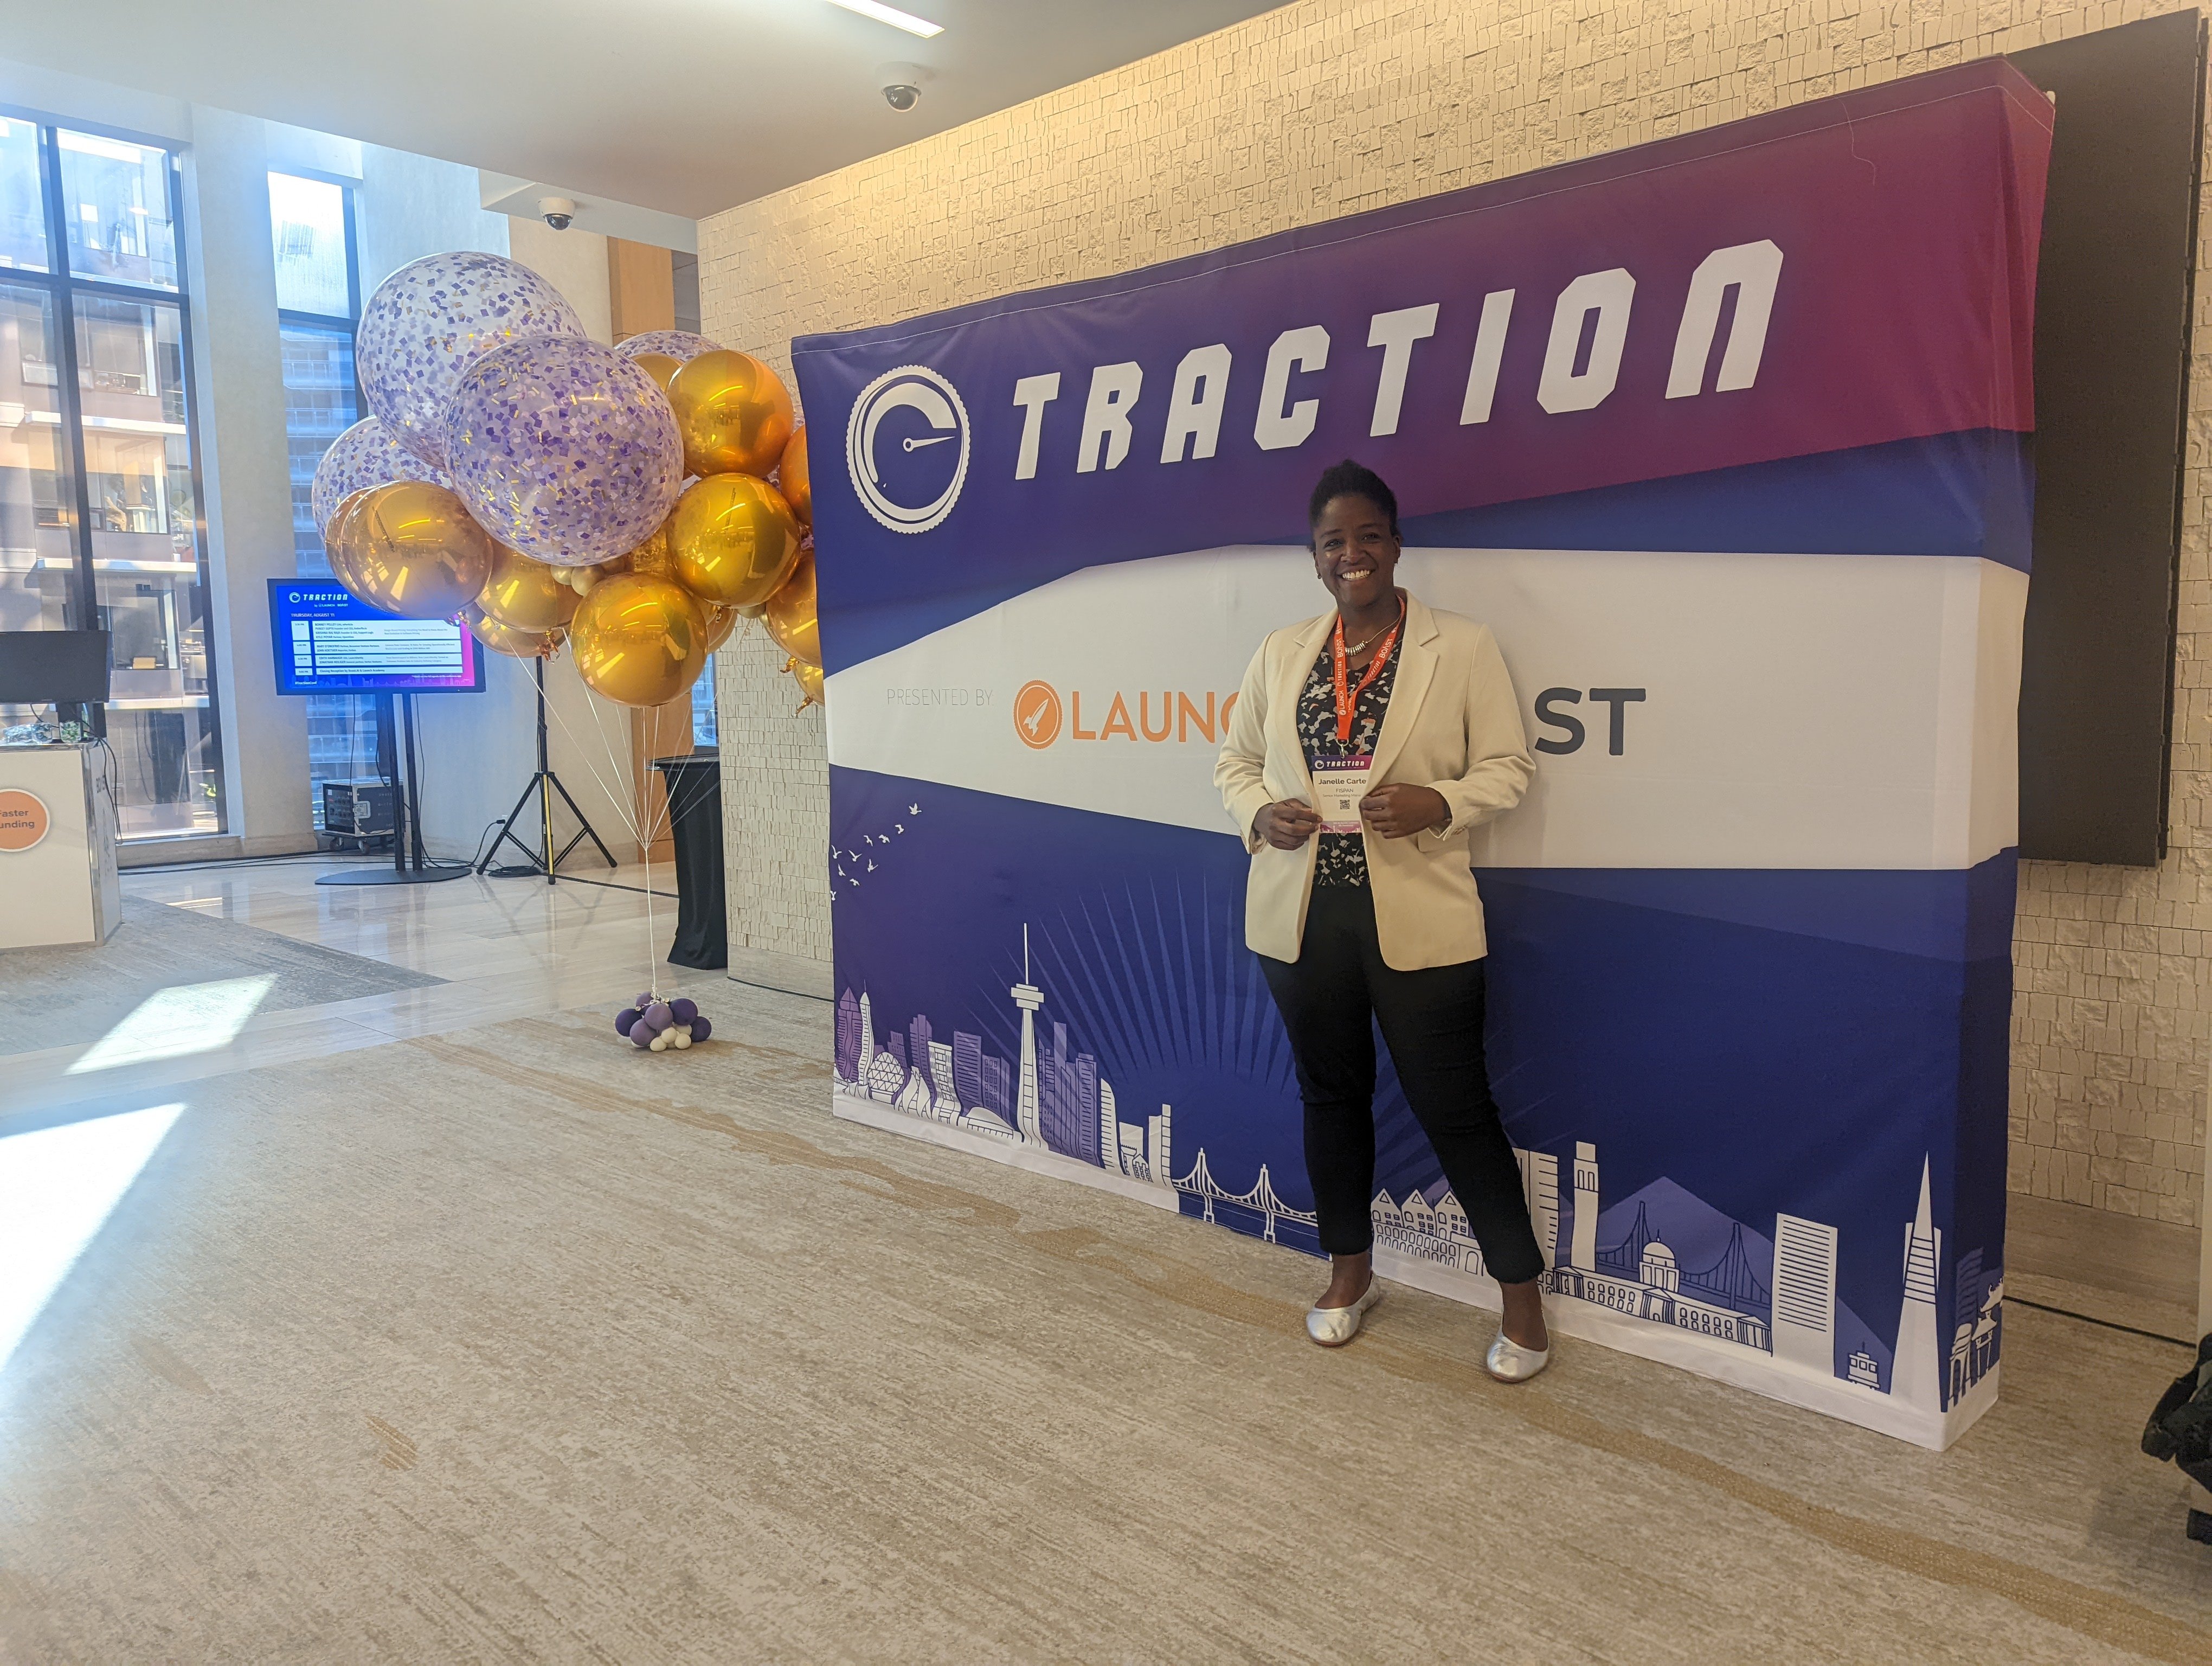 FISPAN employee Janelle Carter pictured at Traction conference